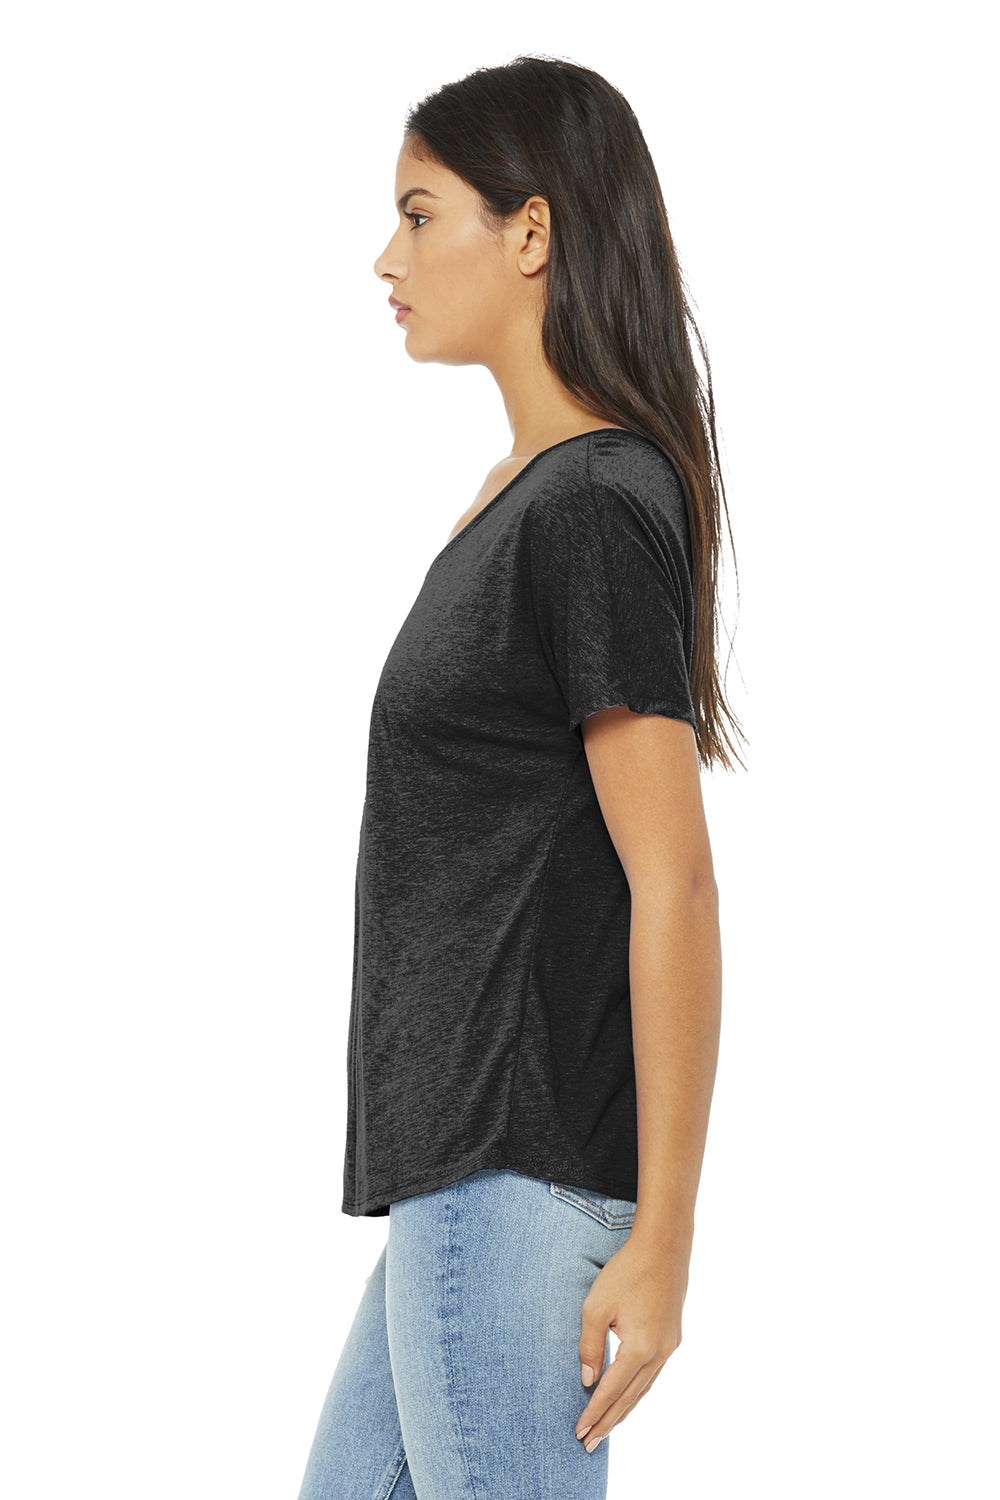 Bella + Canvas BC8816/8816 Womens Slouchy Short Sleeve Wide Neck T-Shirt Charcoal Black Triblend Model Side